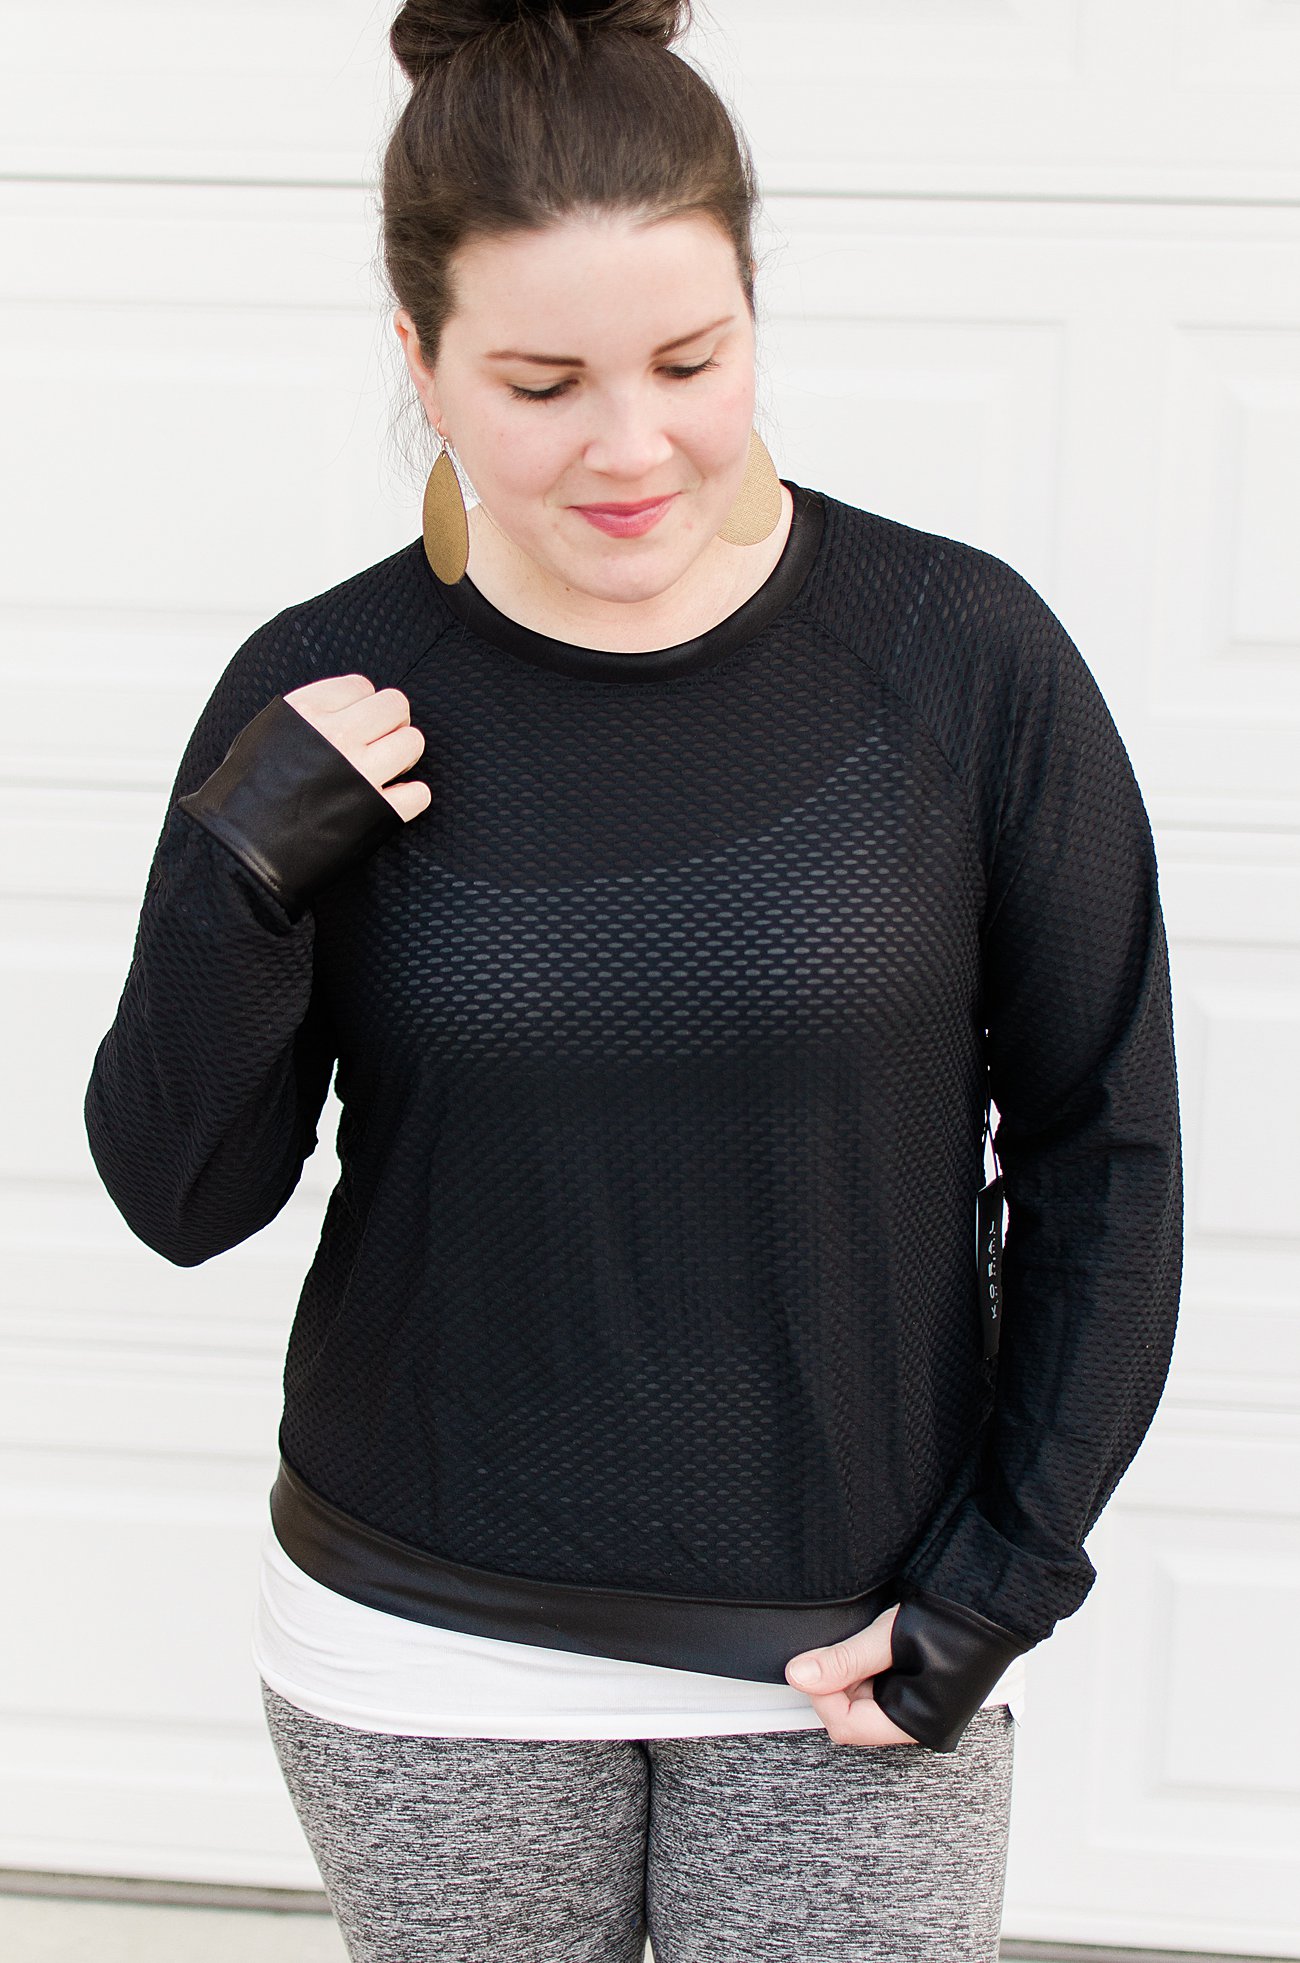 Stitch Fix KORAL - Sofia Mesh Performance Top - SIZE: L - $98 (Made in the USA) - My 50th Fix & 5 Tips for Developing a Relationship with Your Stitch Fix Stylist by popular North Carolina ethical fashion blogger Still Being Molly